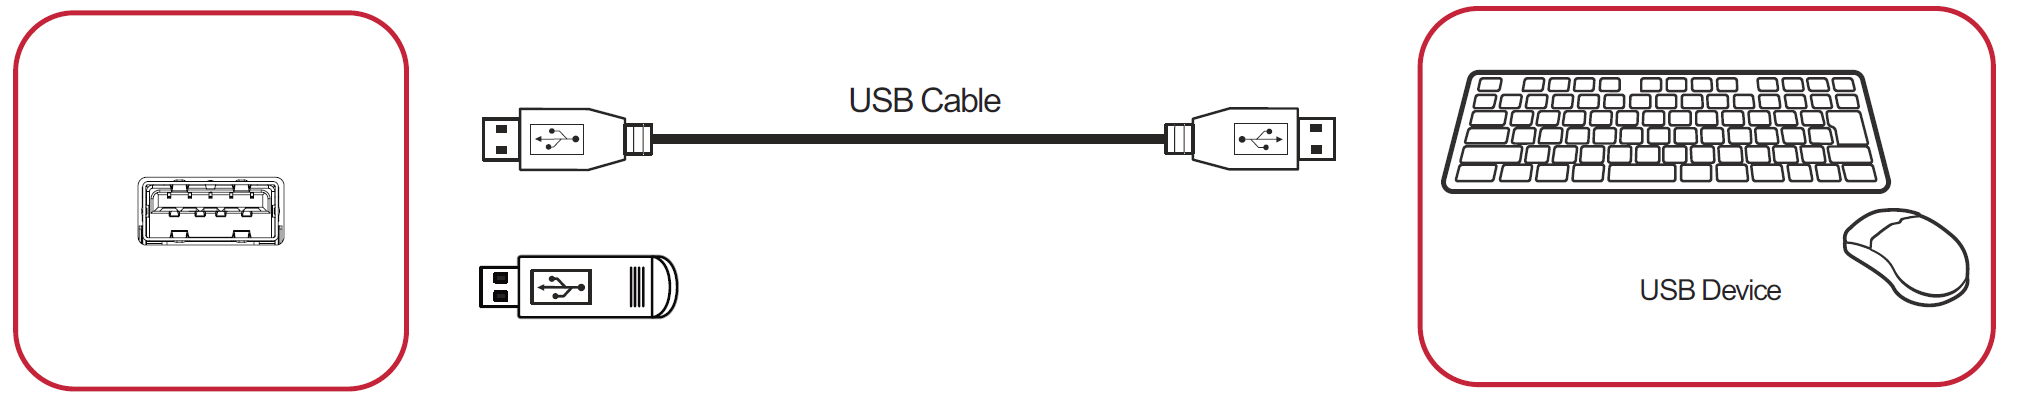 IFP52 USB Connection.png